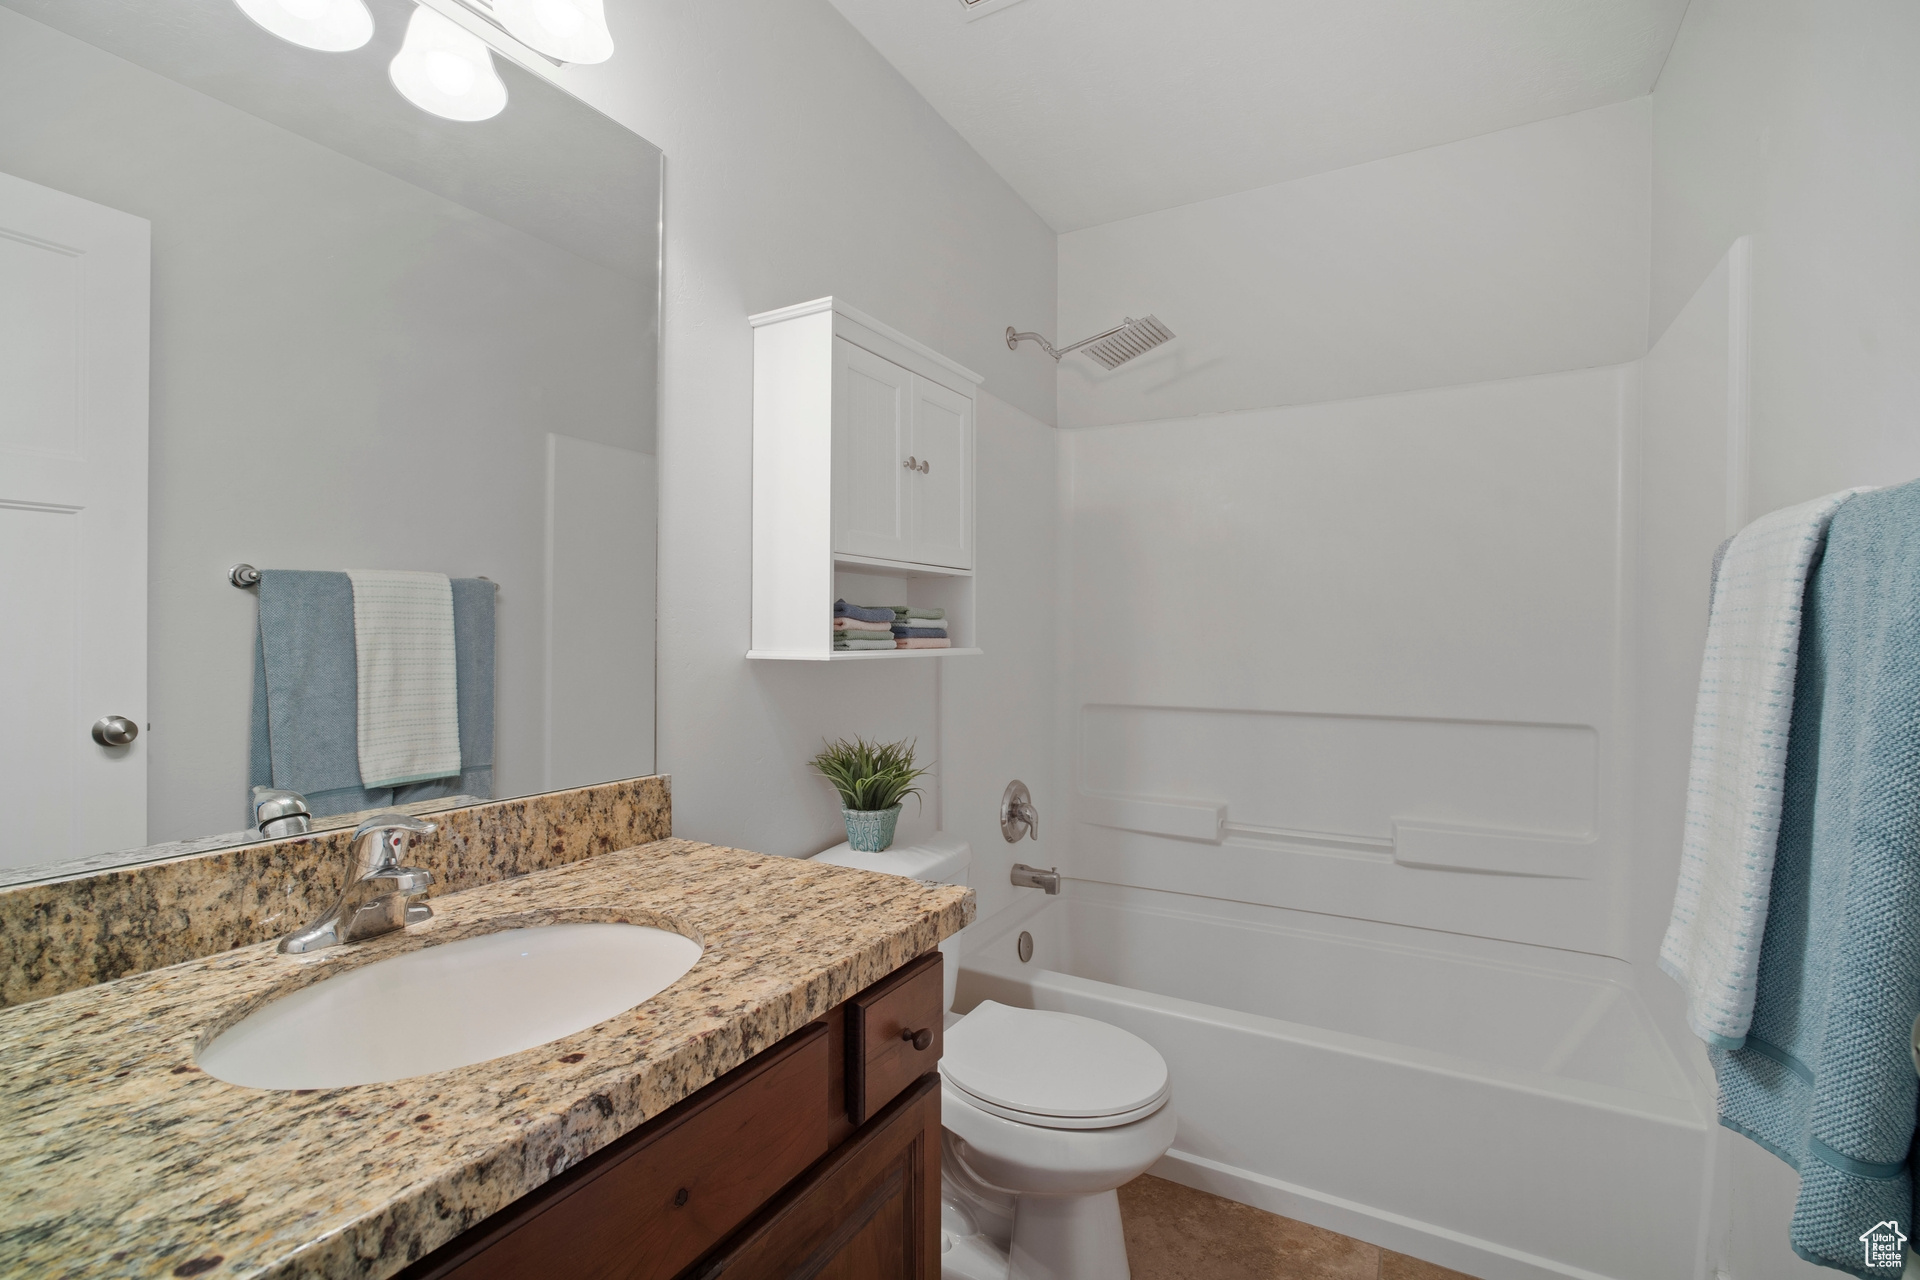 Full bathroom with tile floors, ample storage and upgraded shower fixture.